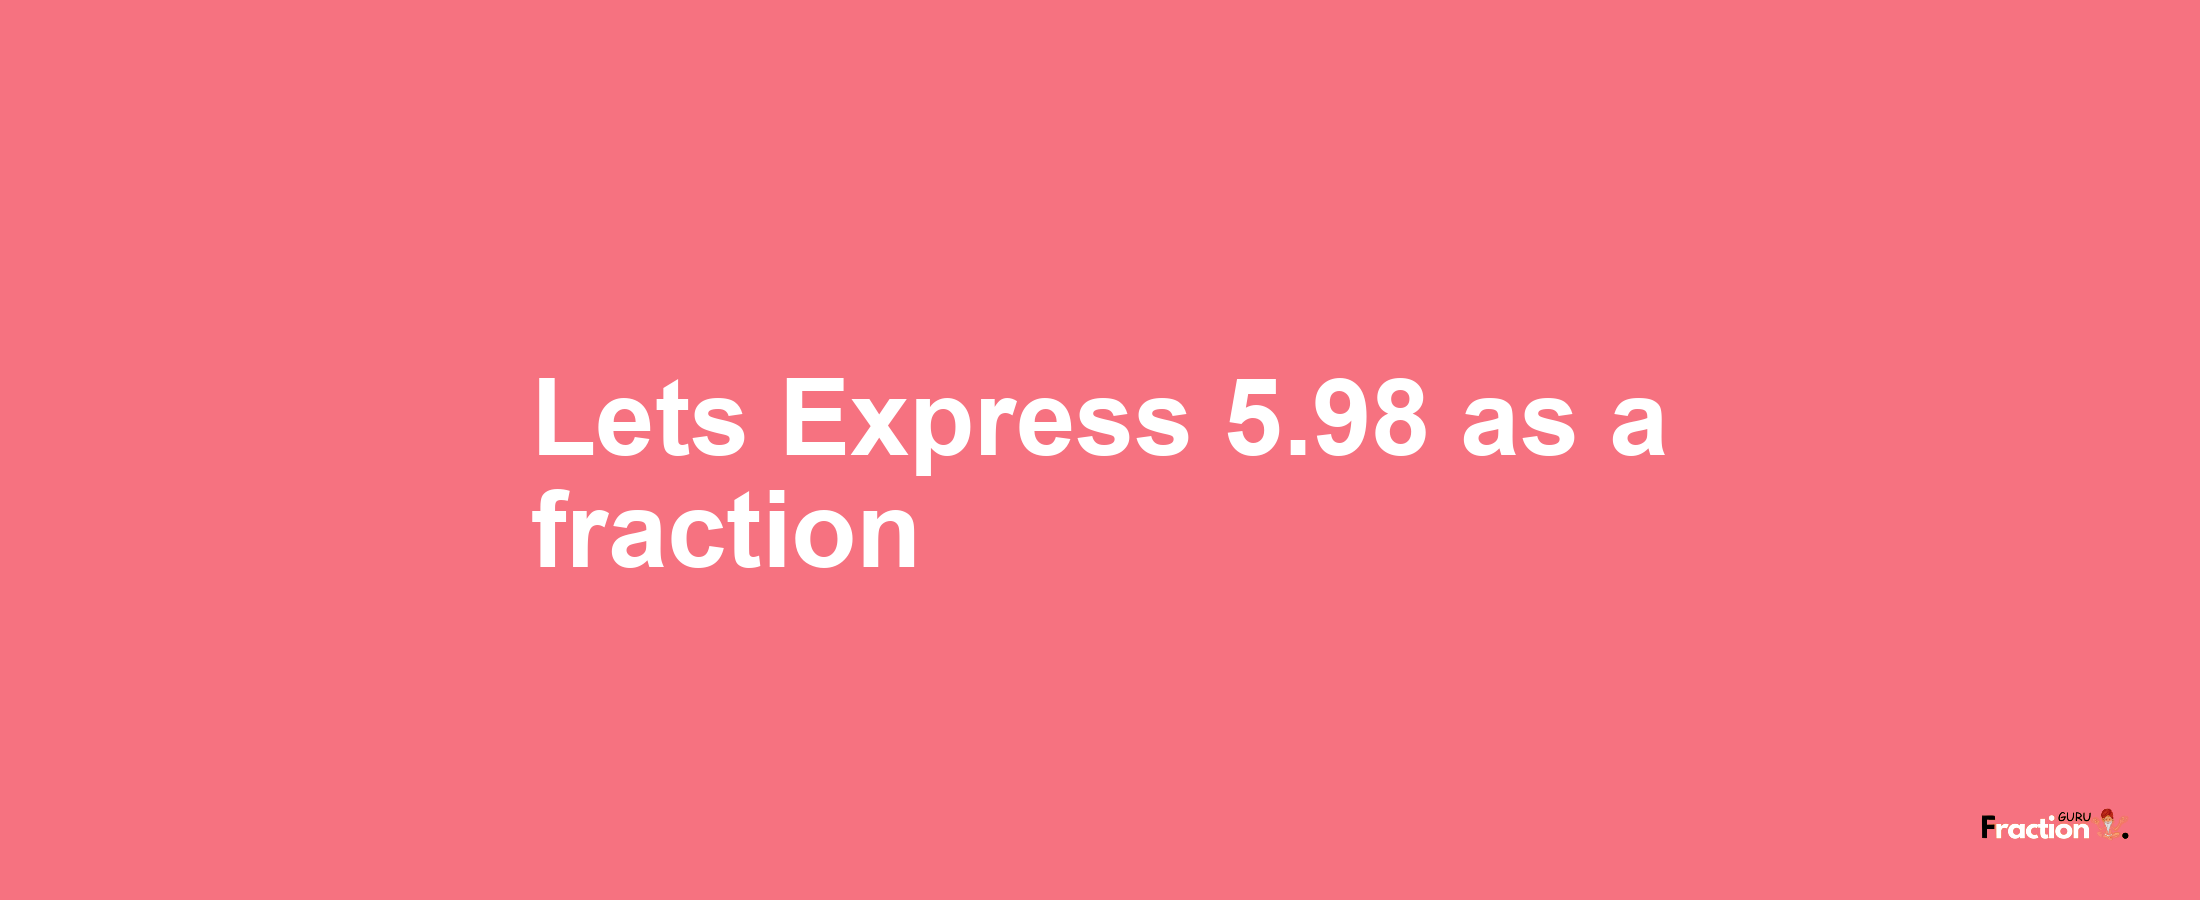 Lets Express 5.98 as afraction